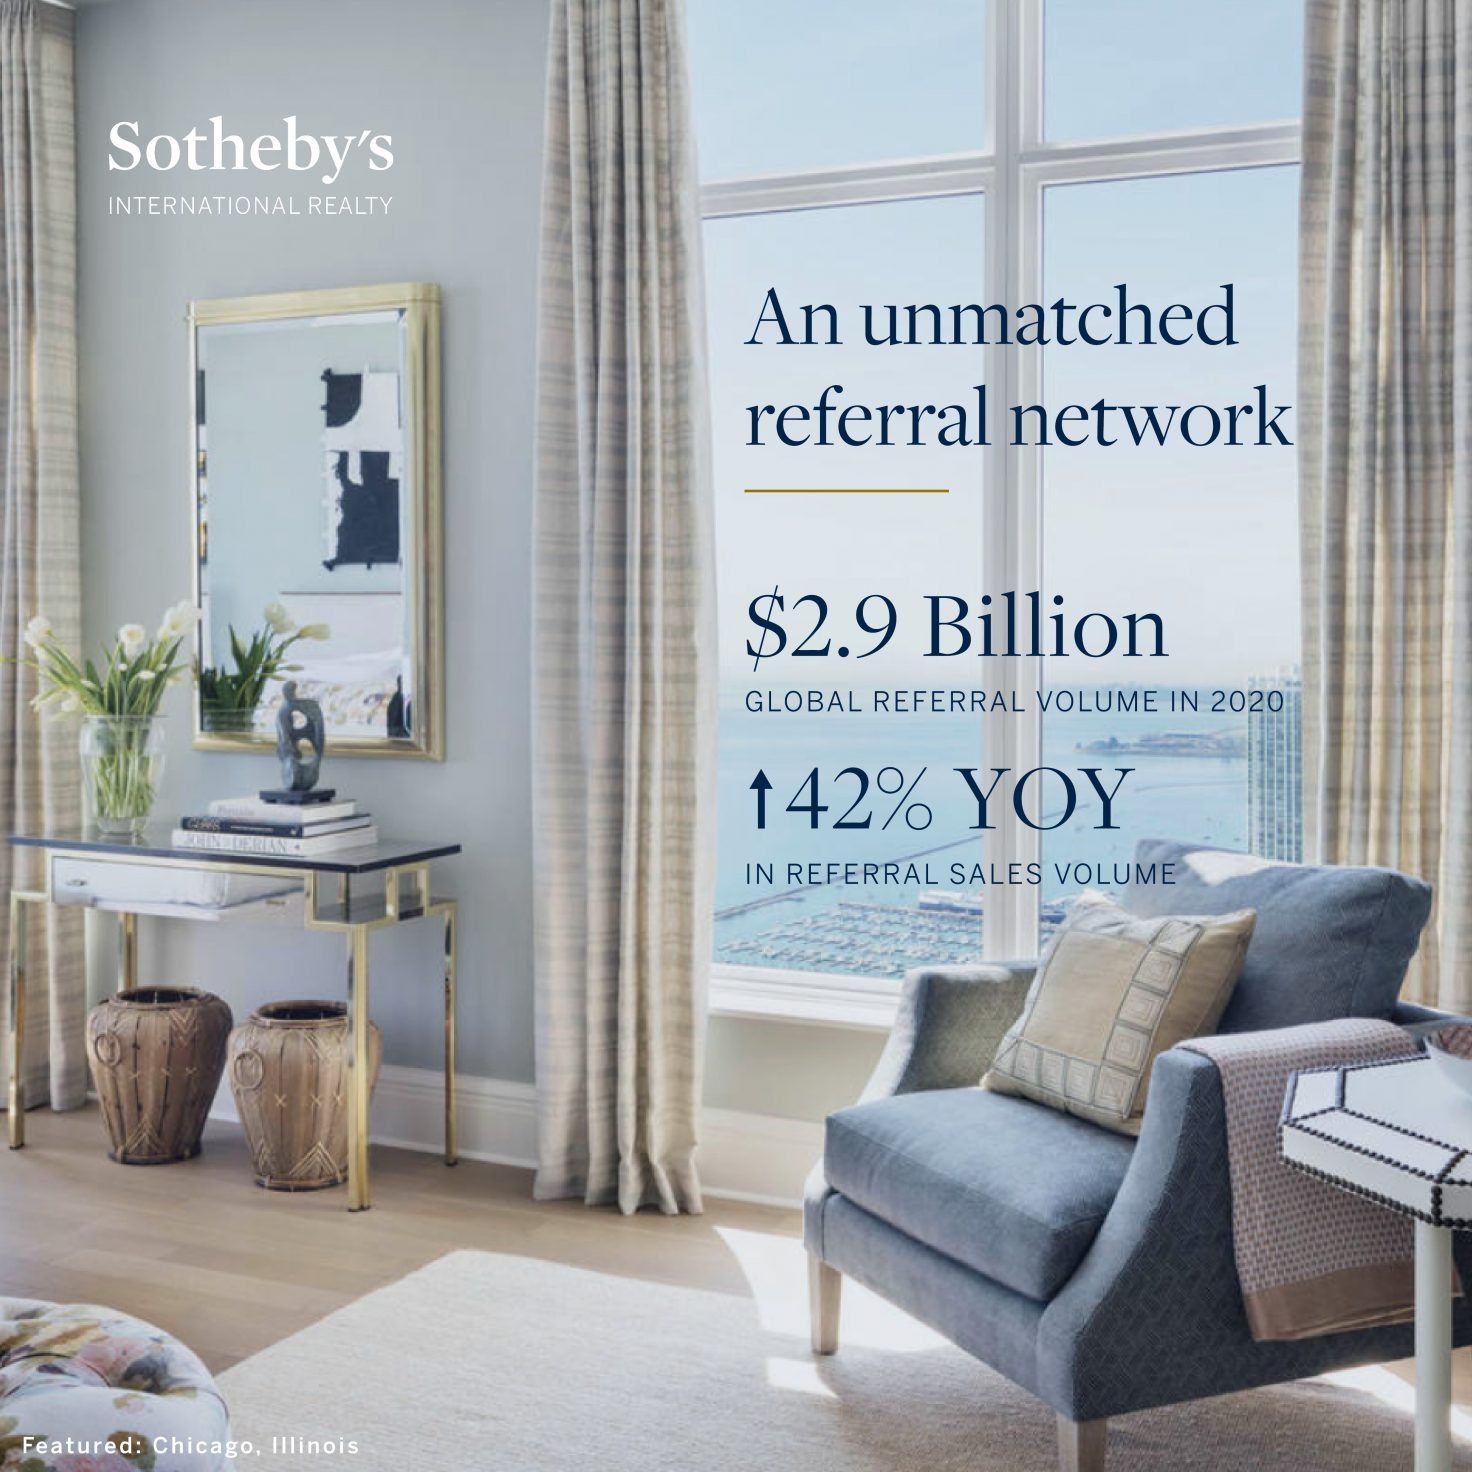 Sotheby's Network